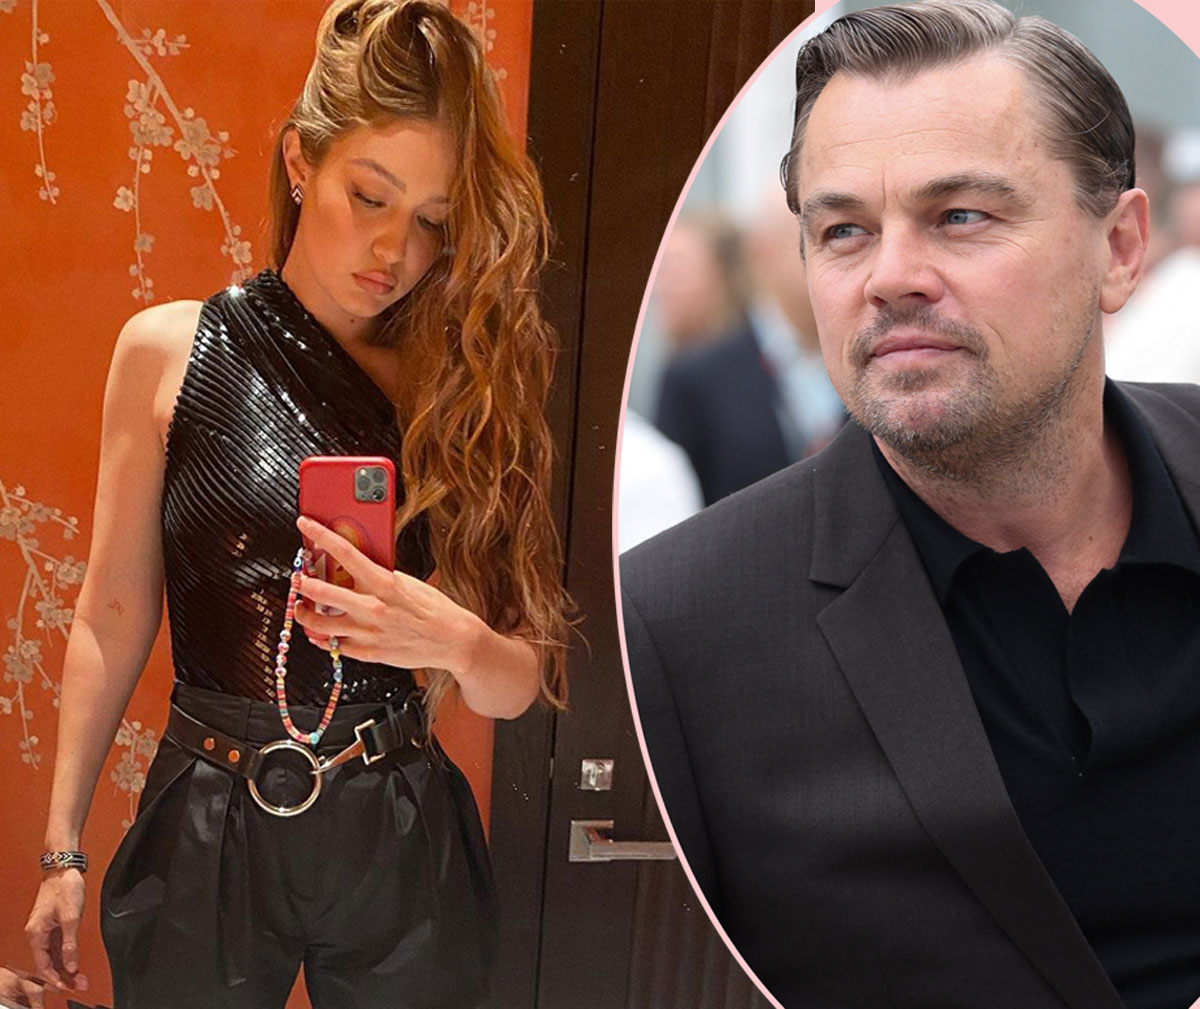 #Leonardo DiCaprio & Gigi Hadid Still ‘Have Fun’ Together Despite His Recent Outing With Another Model